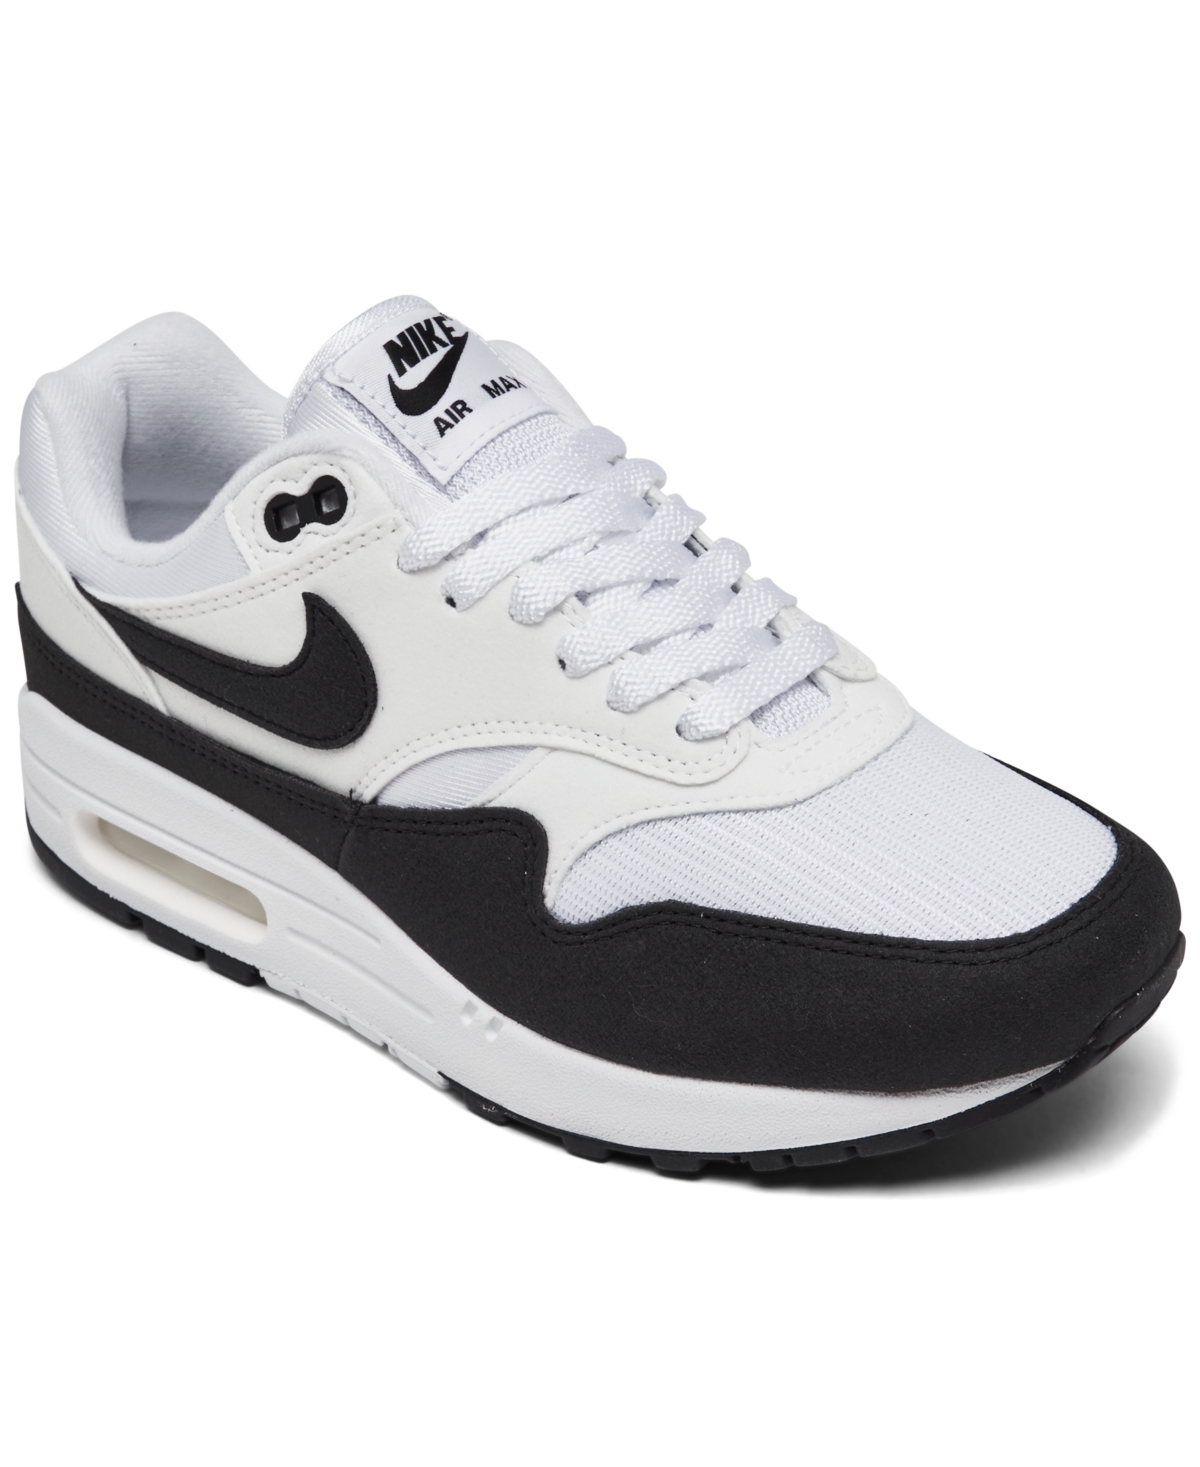 Women's Air Max 1 '87 Casual Sneakers from Finish Line - White, Summit White, Black